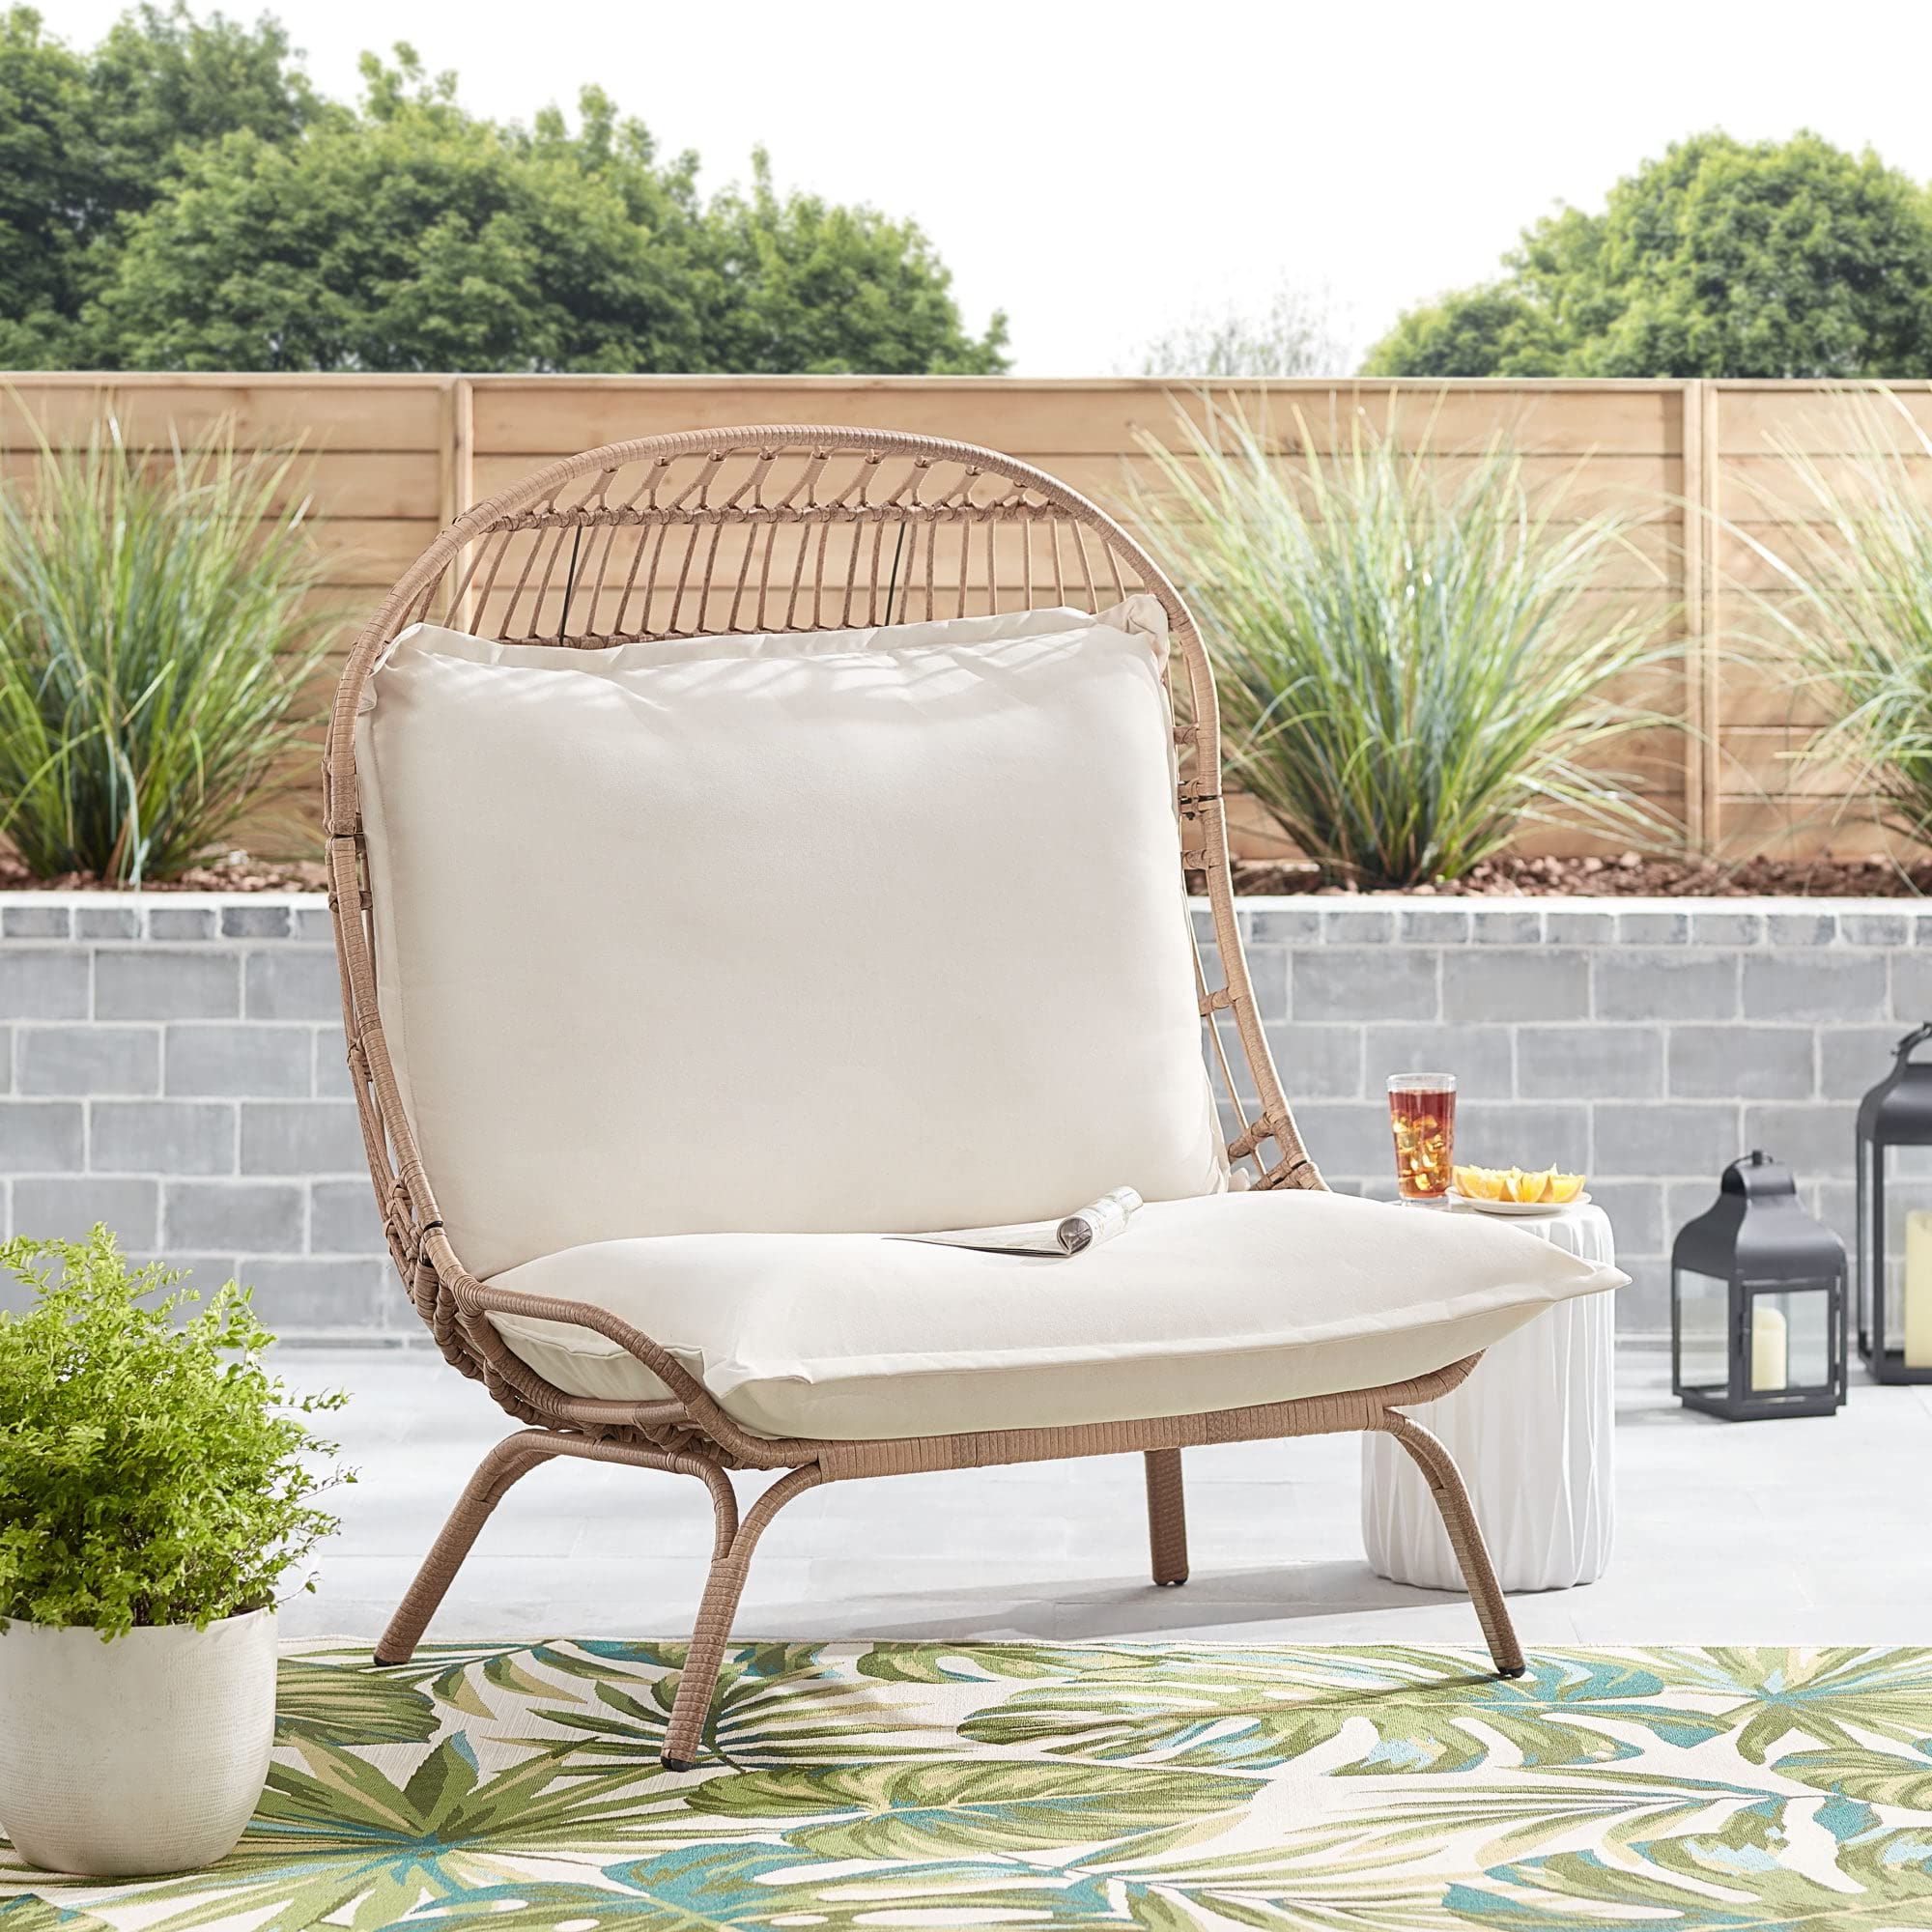 Amazon: Better Homes Gardens Willow Sage Steel Wicker Patio Cuddle Chair,  Brown,wicker Egg Chair, Oversized Indoor Outdoor : Patio, Lawn & Garden Throughout Well Known All Weather Wicker Outdoor Cuddle Chair And Ottoman Set (View 6 of 15)